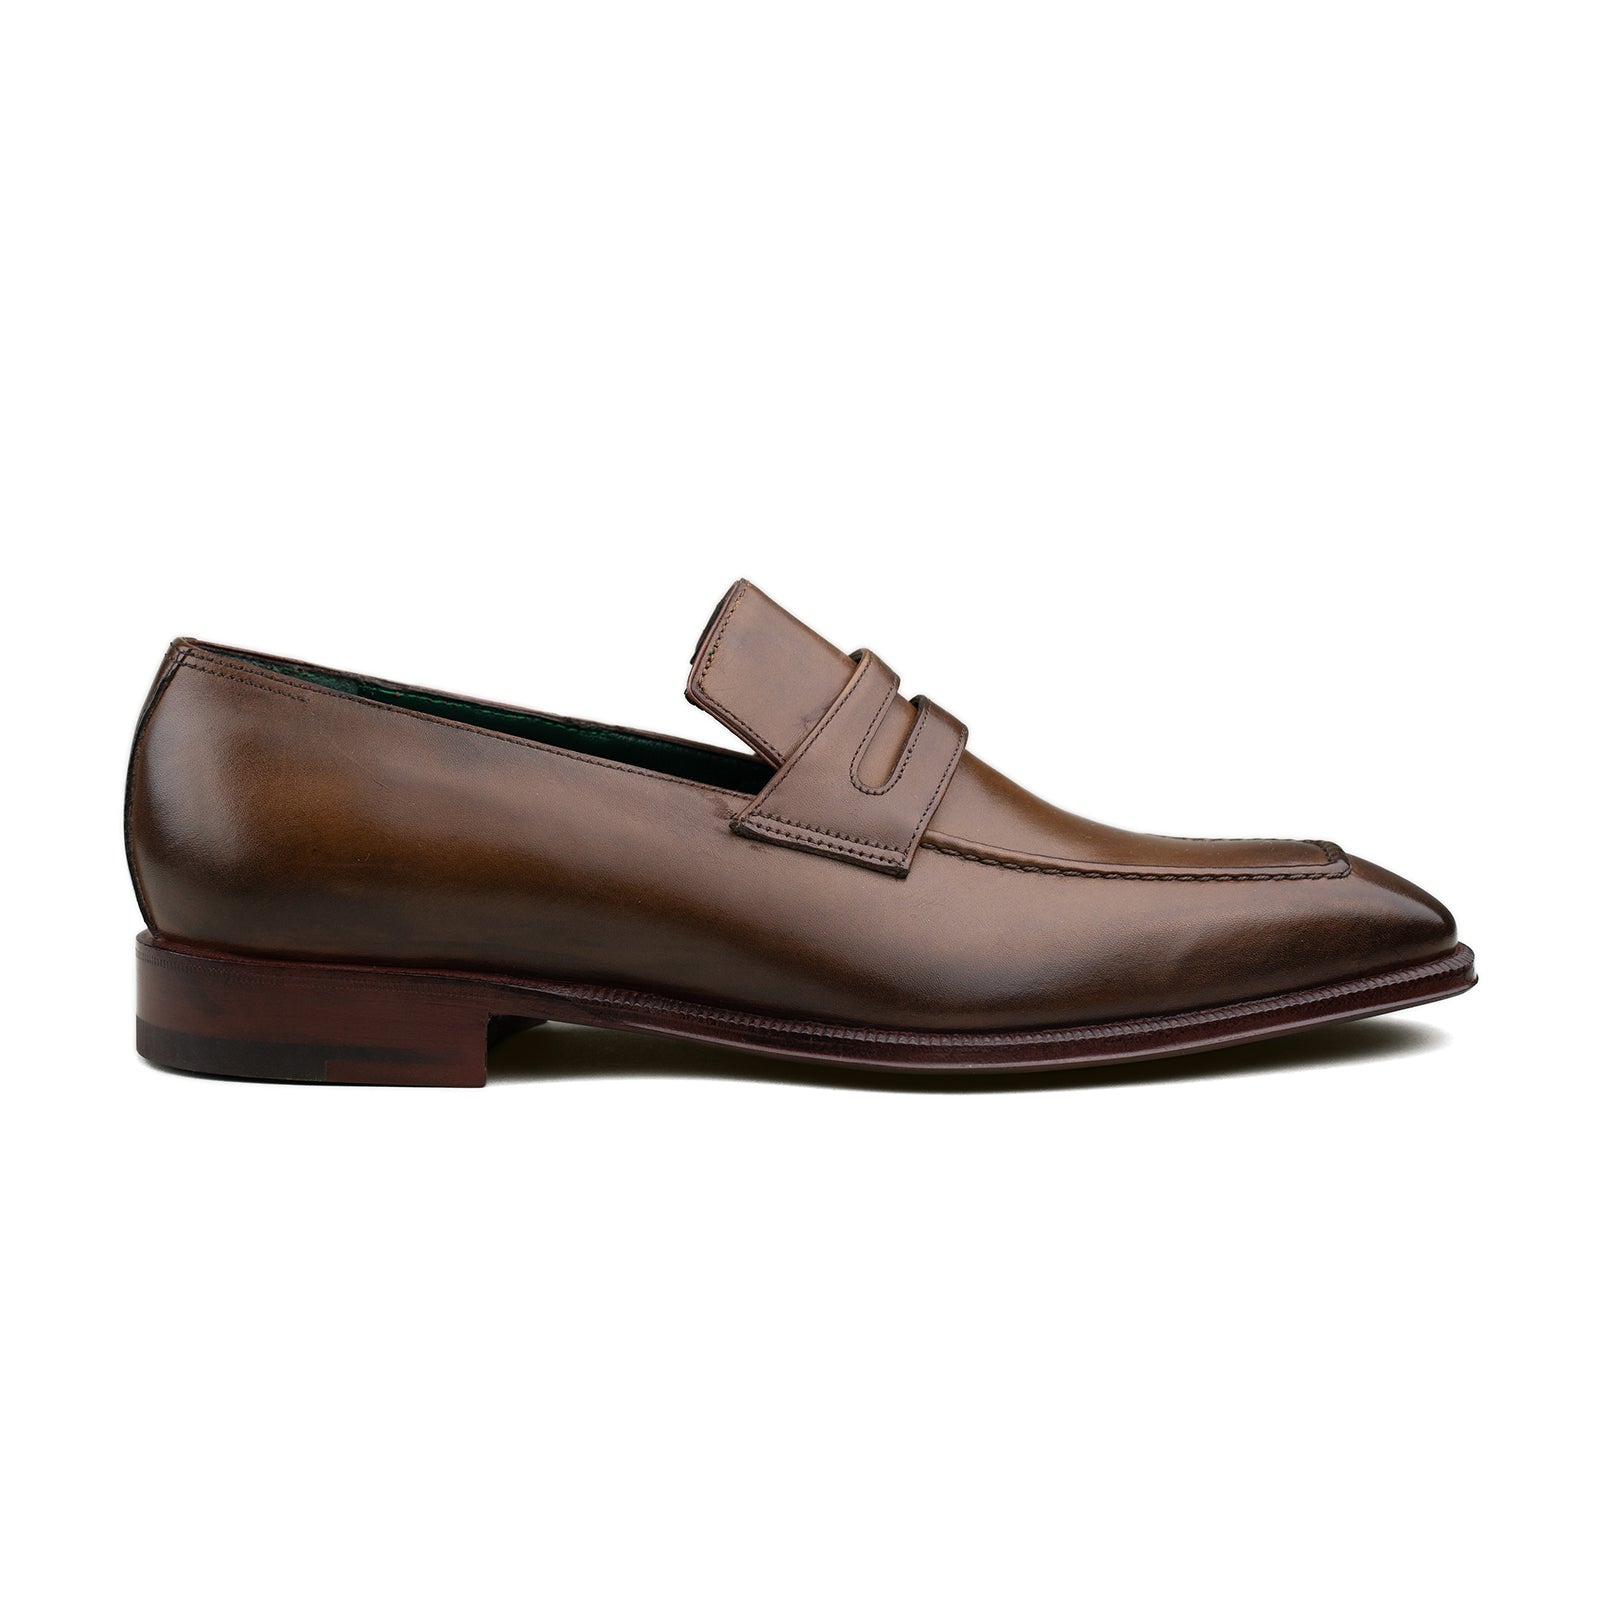 Chiseled Toe Penny Loafer - Tobacco Calf